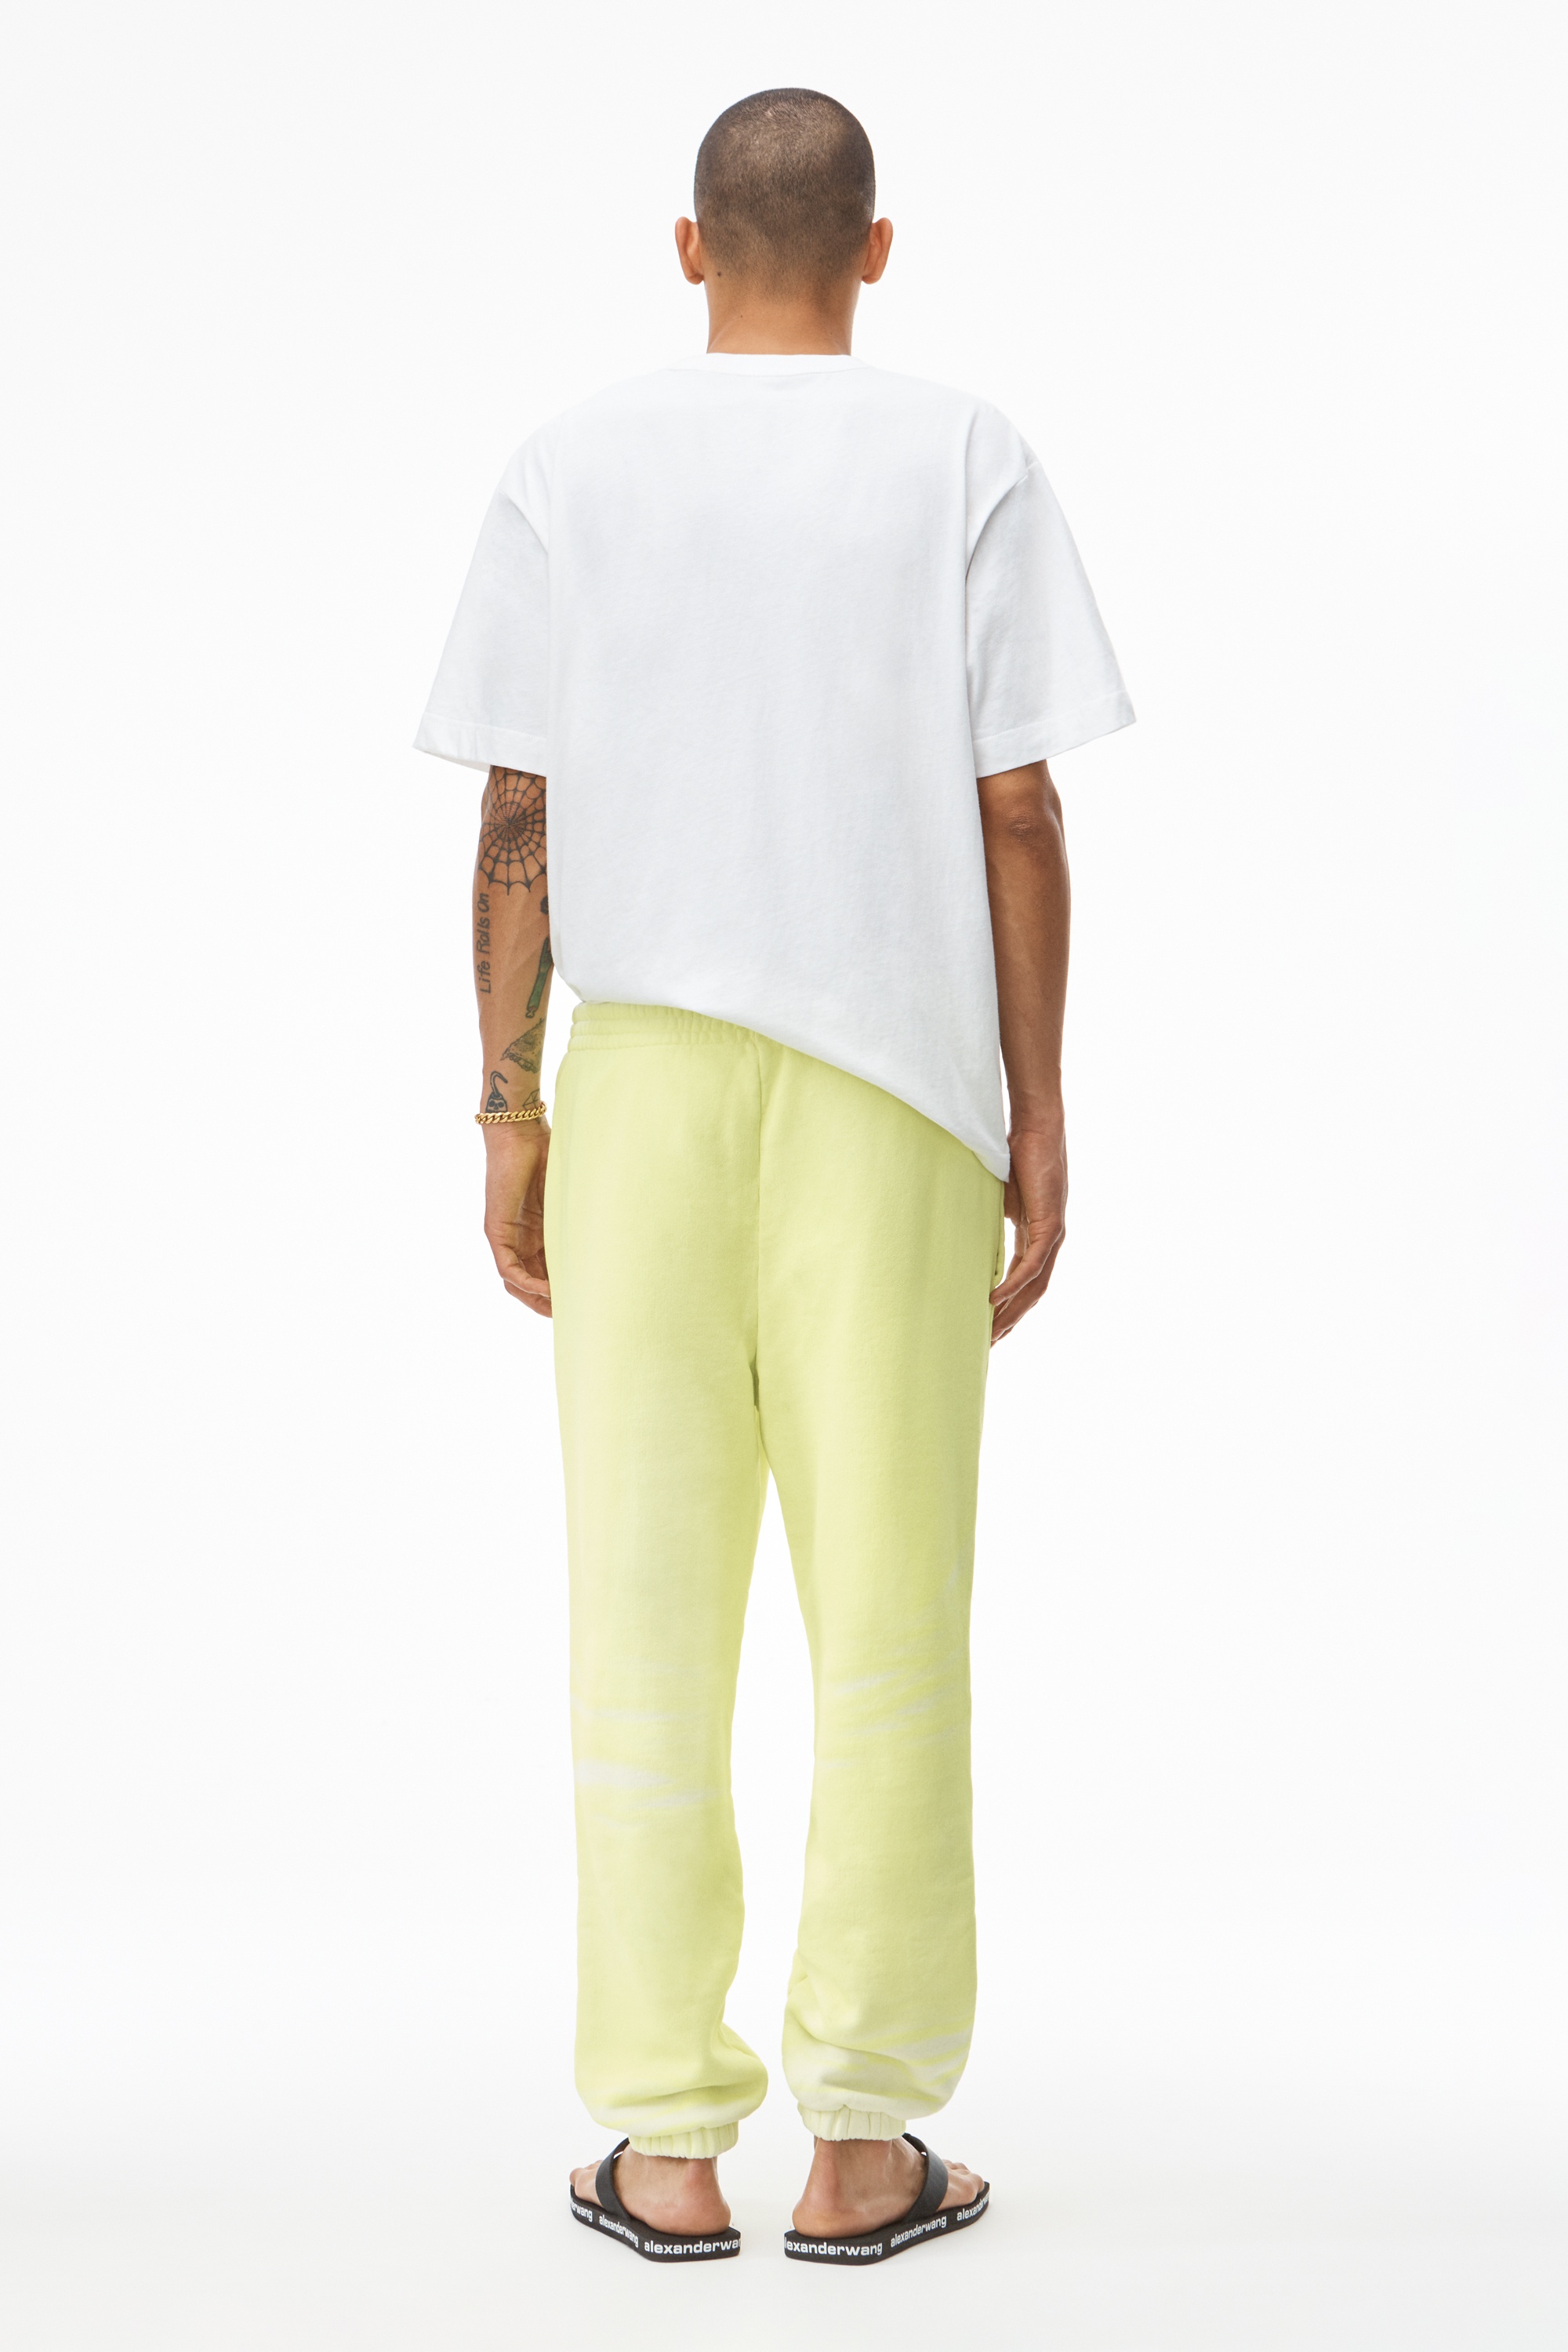 JOGGER SWEATPANT IN GARMENT DYED COTTON - 4